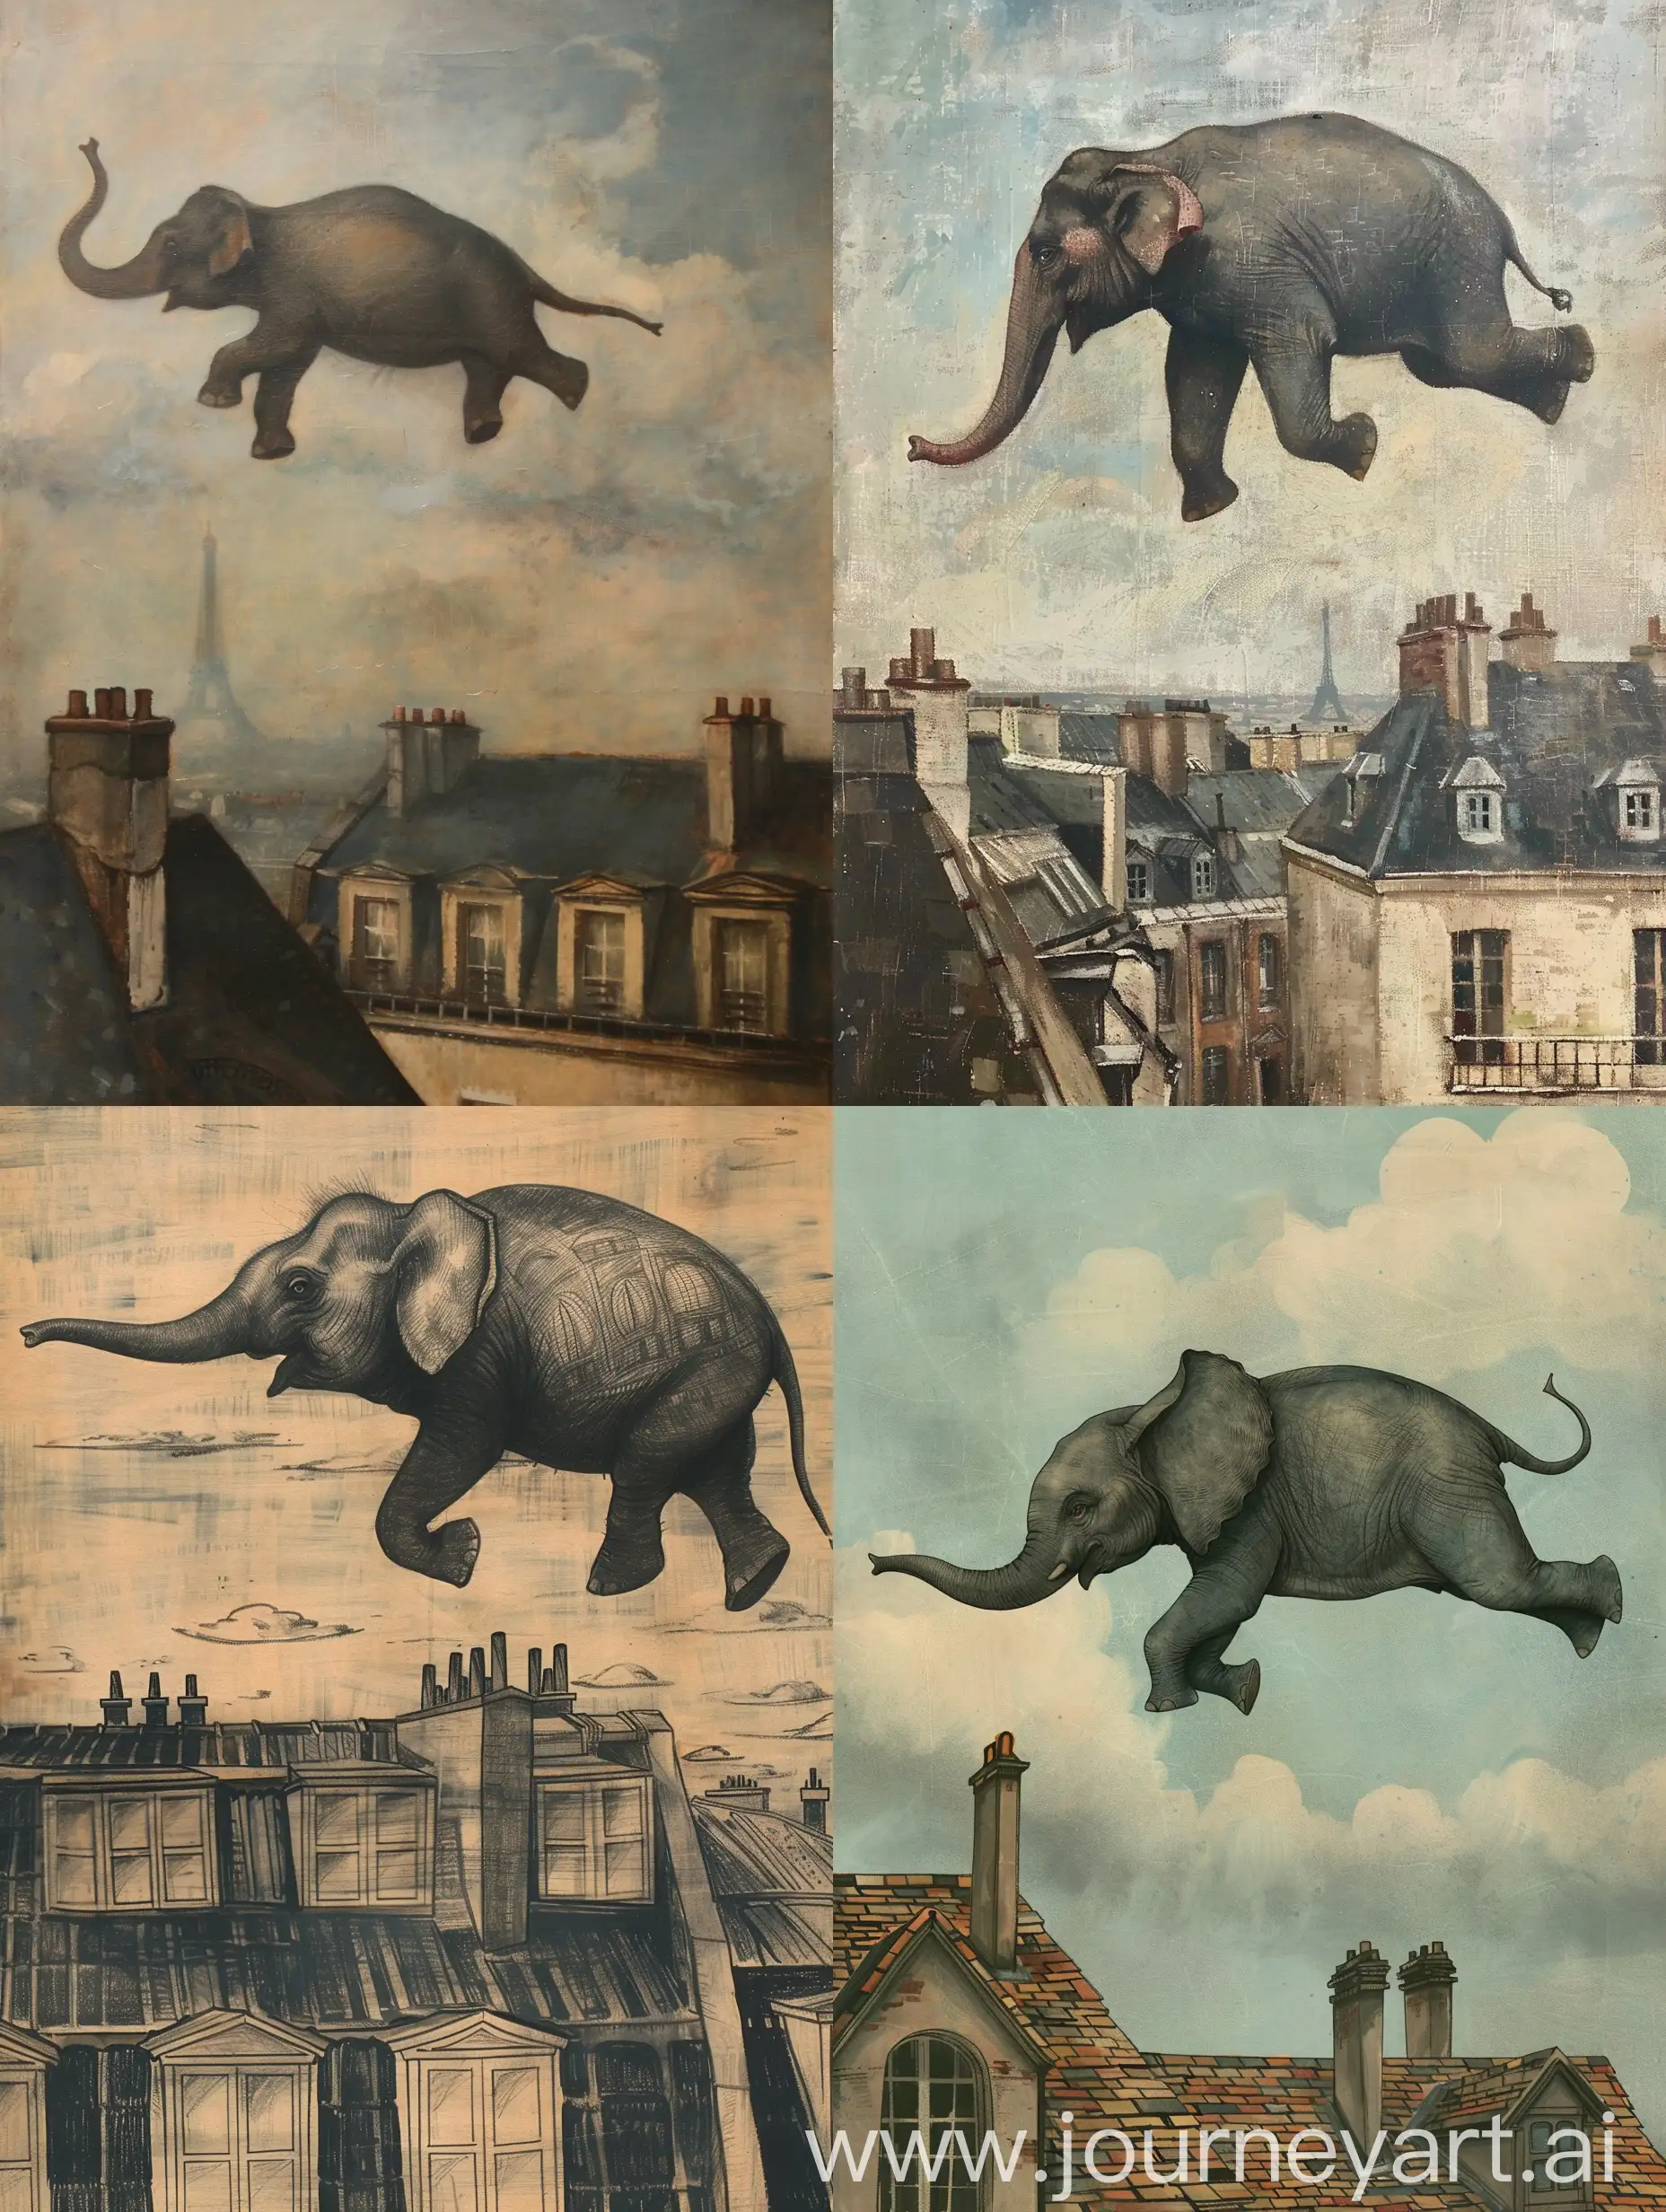 Ethereal-Elephant-Soaring-Above-Paris-Rooftops-in-Edvard-Munch-Style